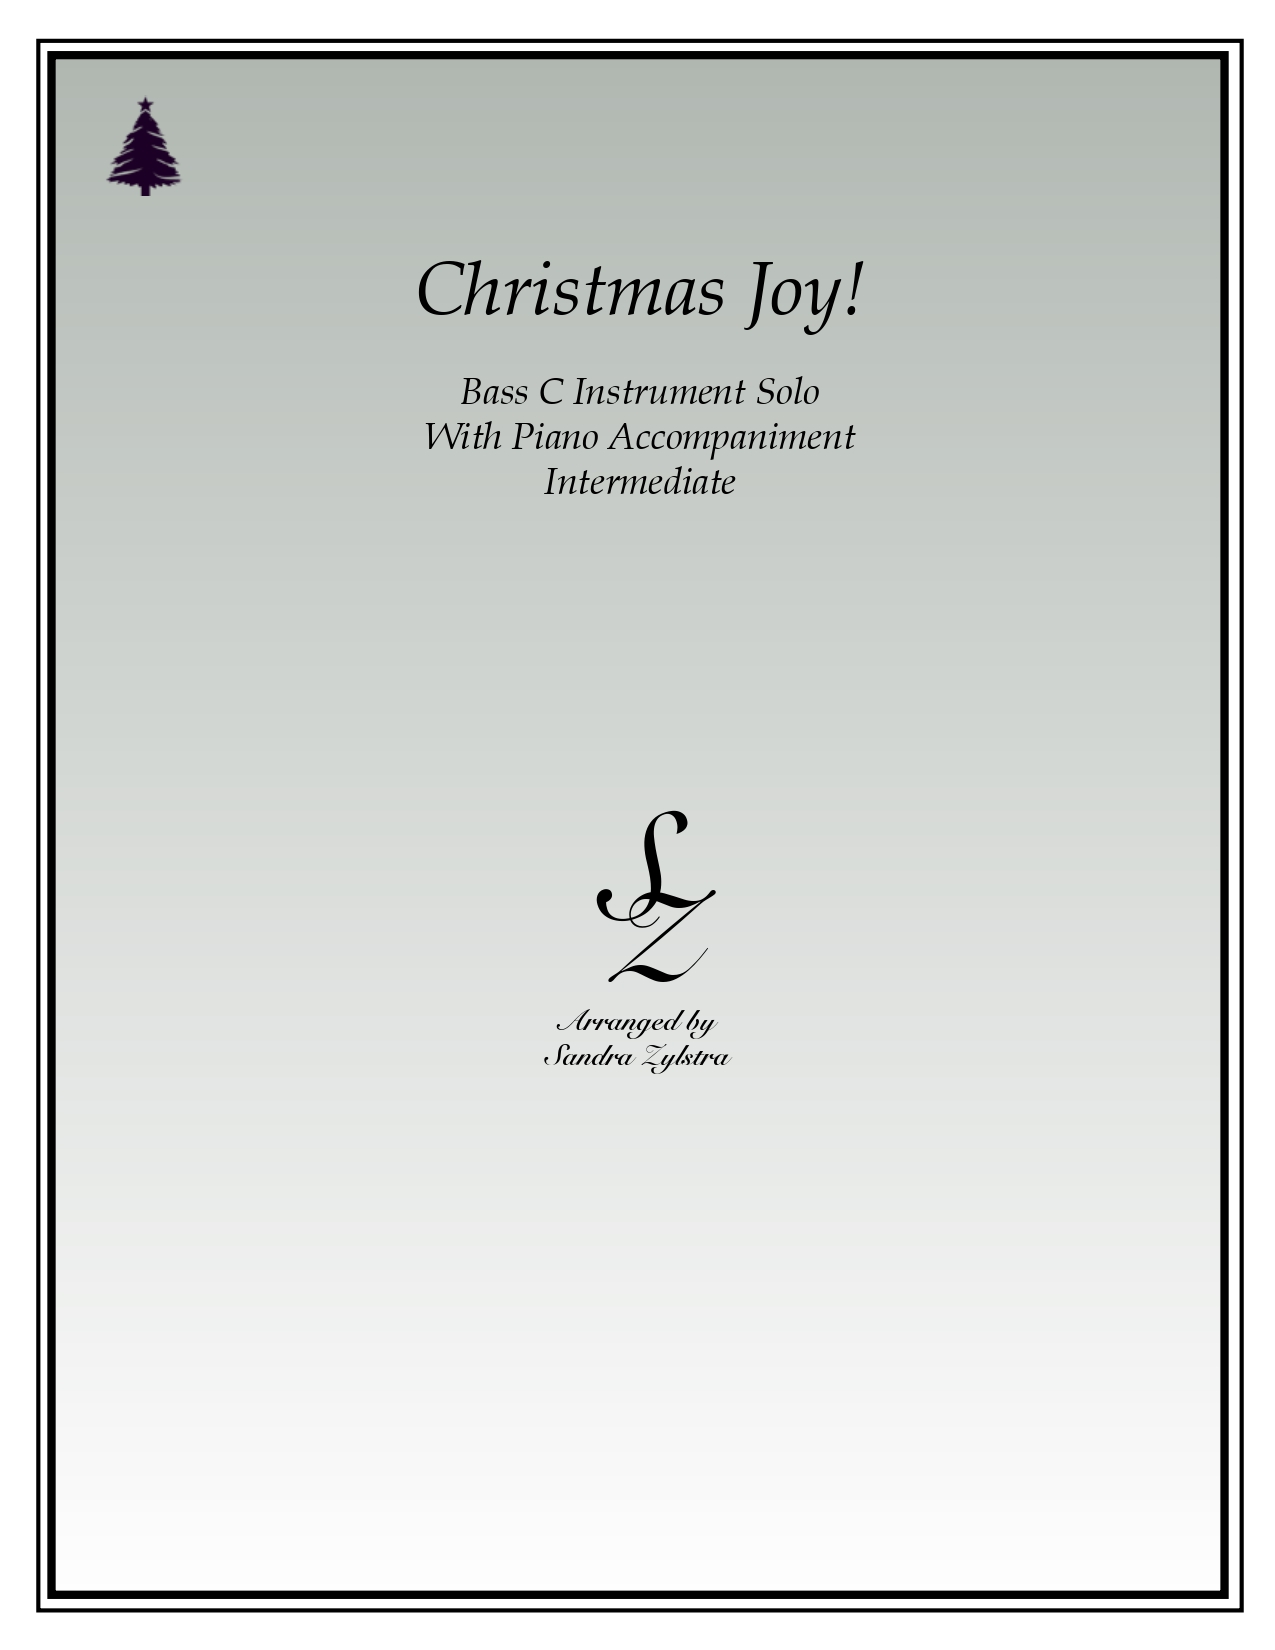 Christmas Joy bass C instrument solo part cover page 00011